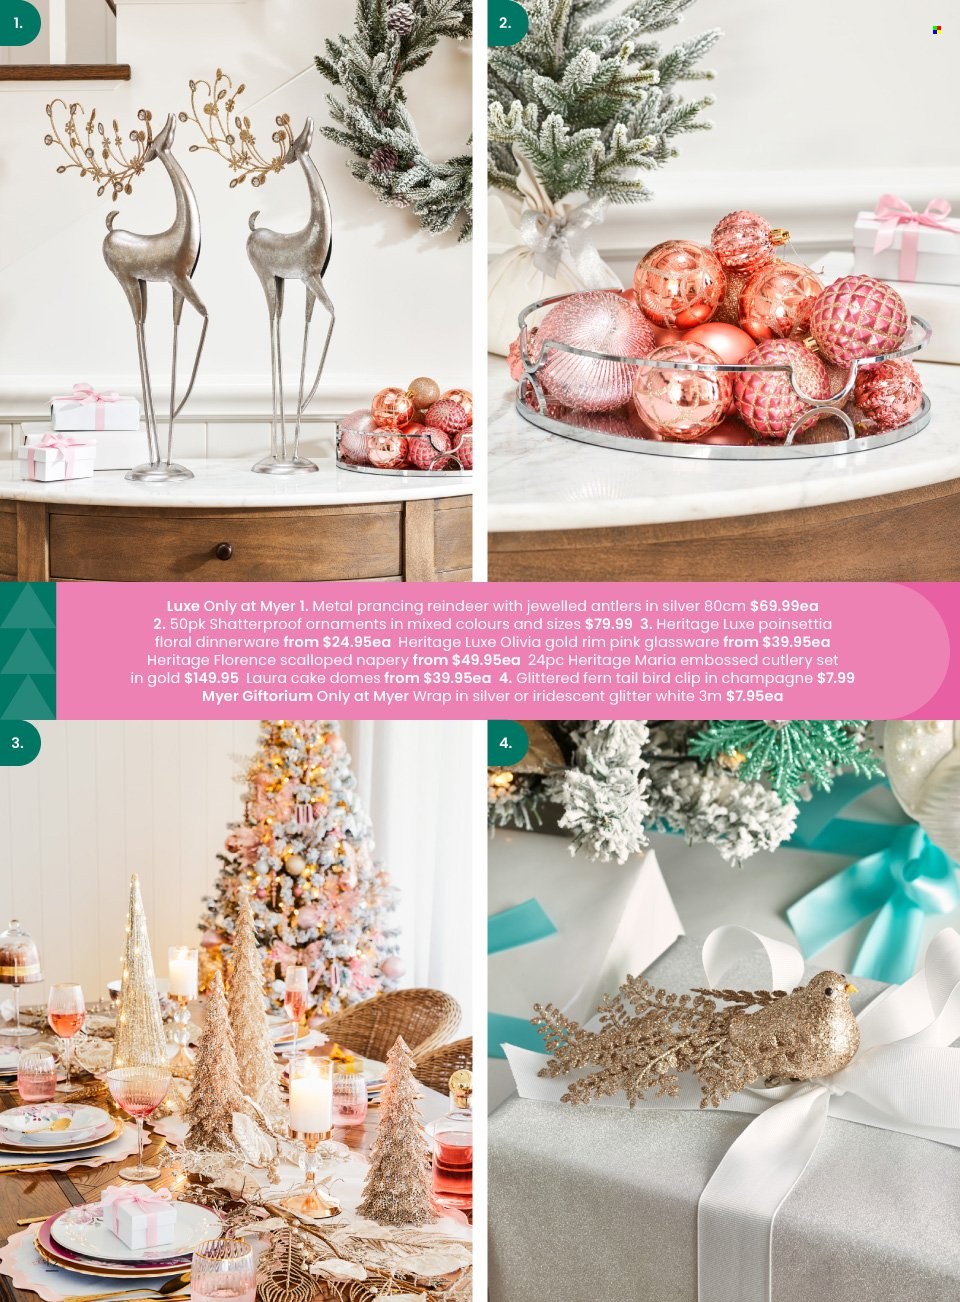 thumbnail - Myer Catalogue - Sales products - dinnerware set, glassware set, cutlery set, glitter, reindeer. Page 12.